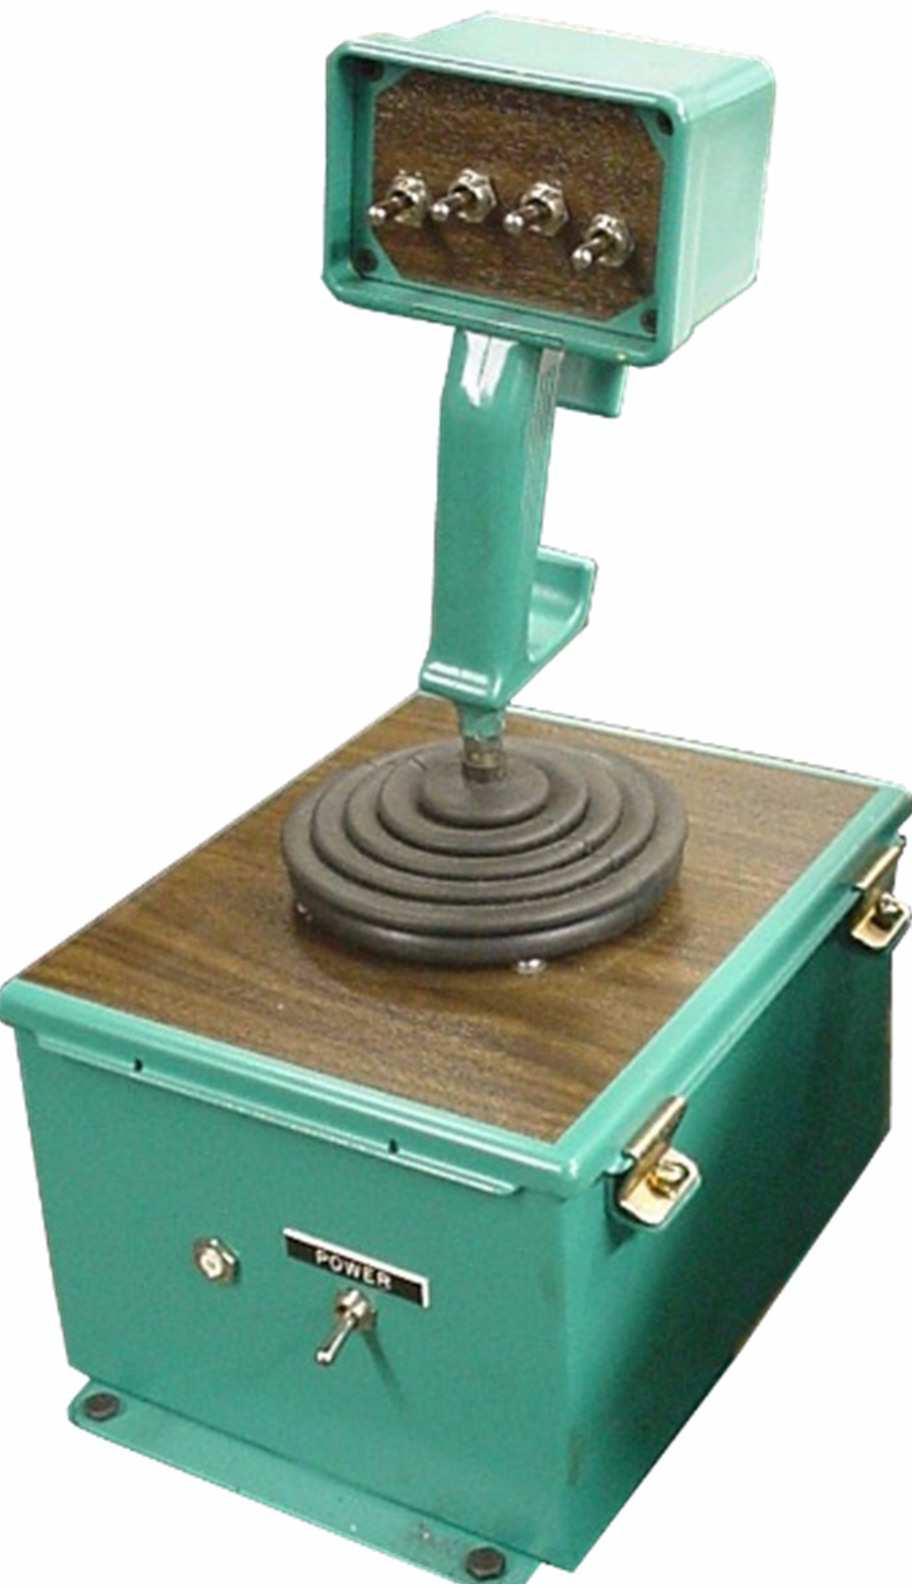 HELLE LOG TURNER JOYSTICK In response to customer requests, we developed an electrical joystick control package for the HELLE Log Turners.